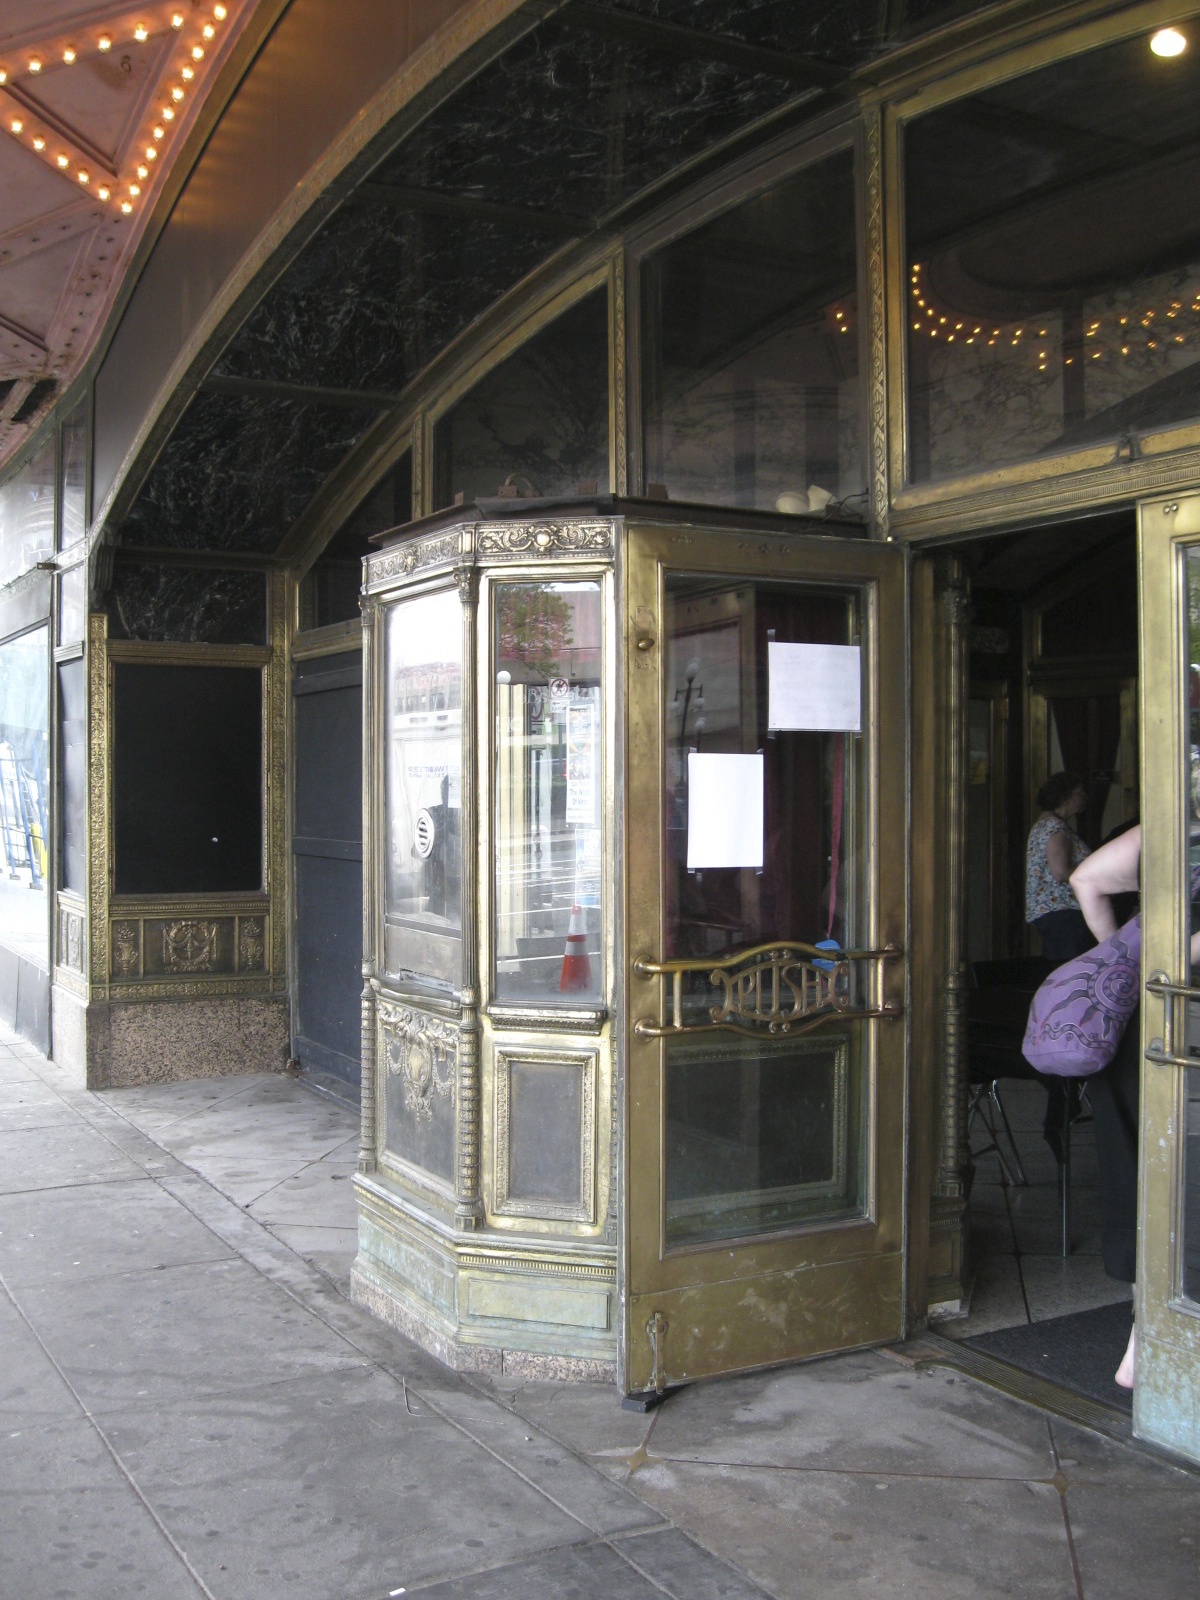 Two Movie Palaces in Journal Square – Maura Elizabeth Cunningham